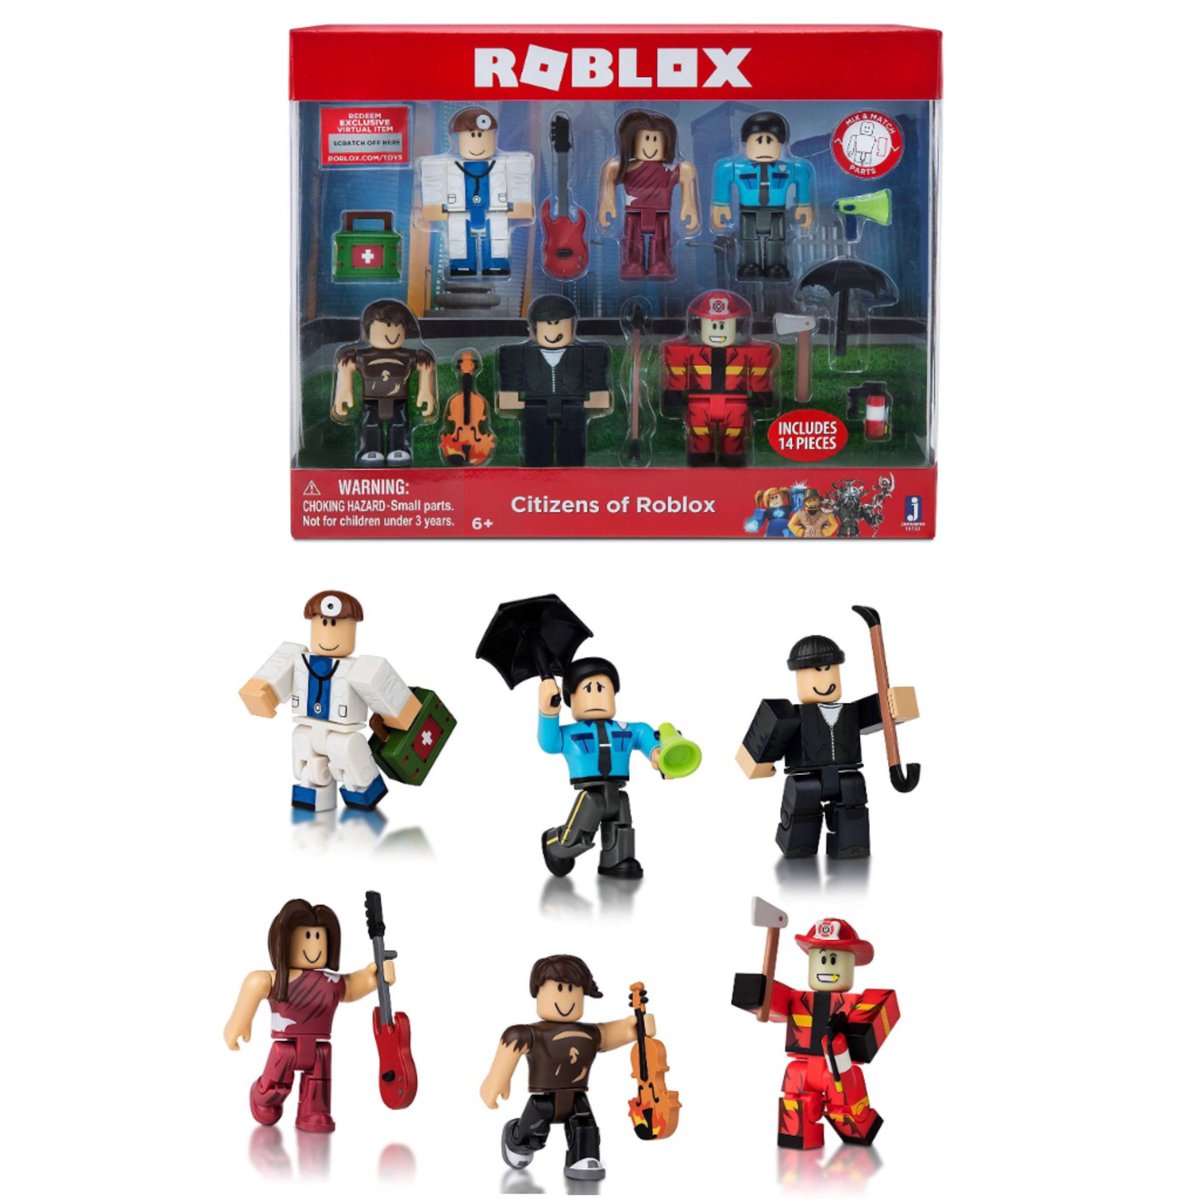 Lily On Twitter Just Got 2 New Roblox Toy Sets This Days Of Knights Set Is Amazing I Can T Wait To Unbox And See All The Hats And Details And Gears And - new roblox toy unboxing the new gold collection